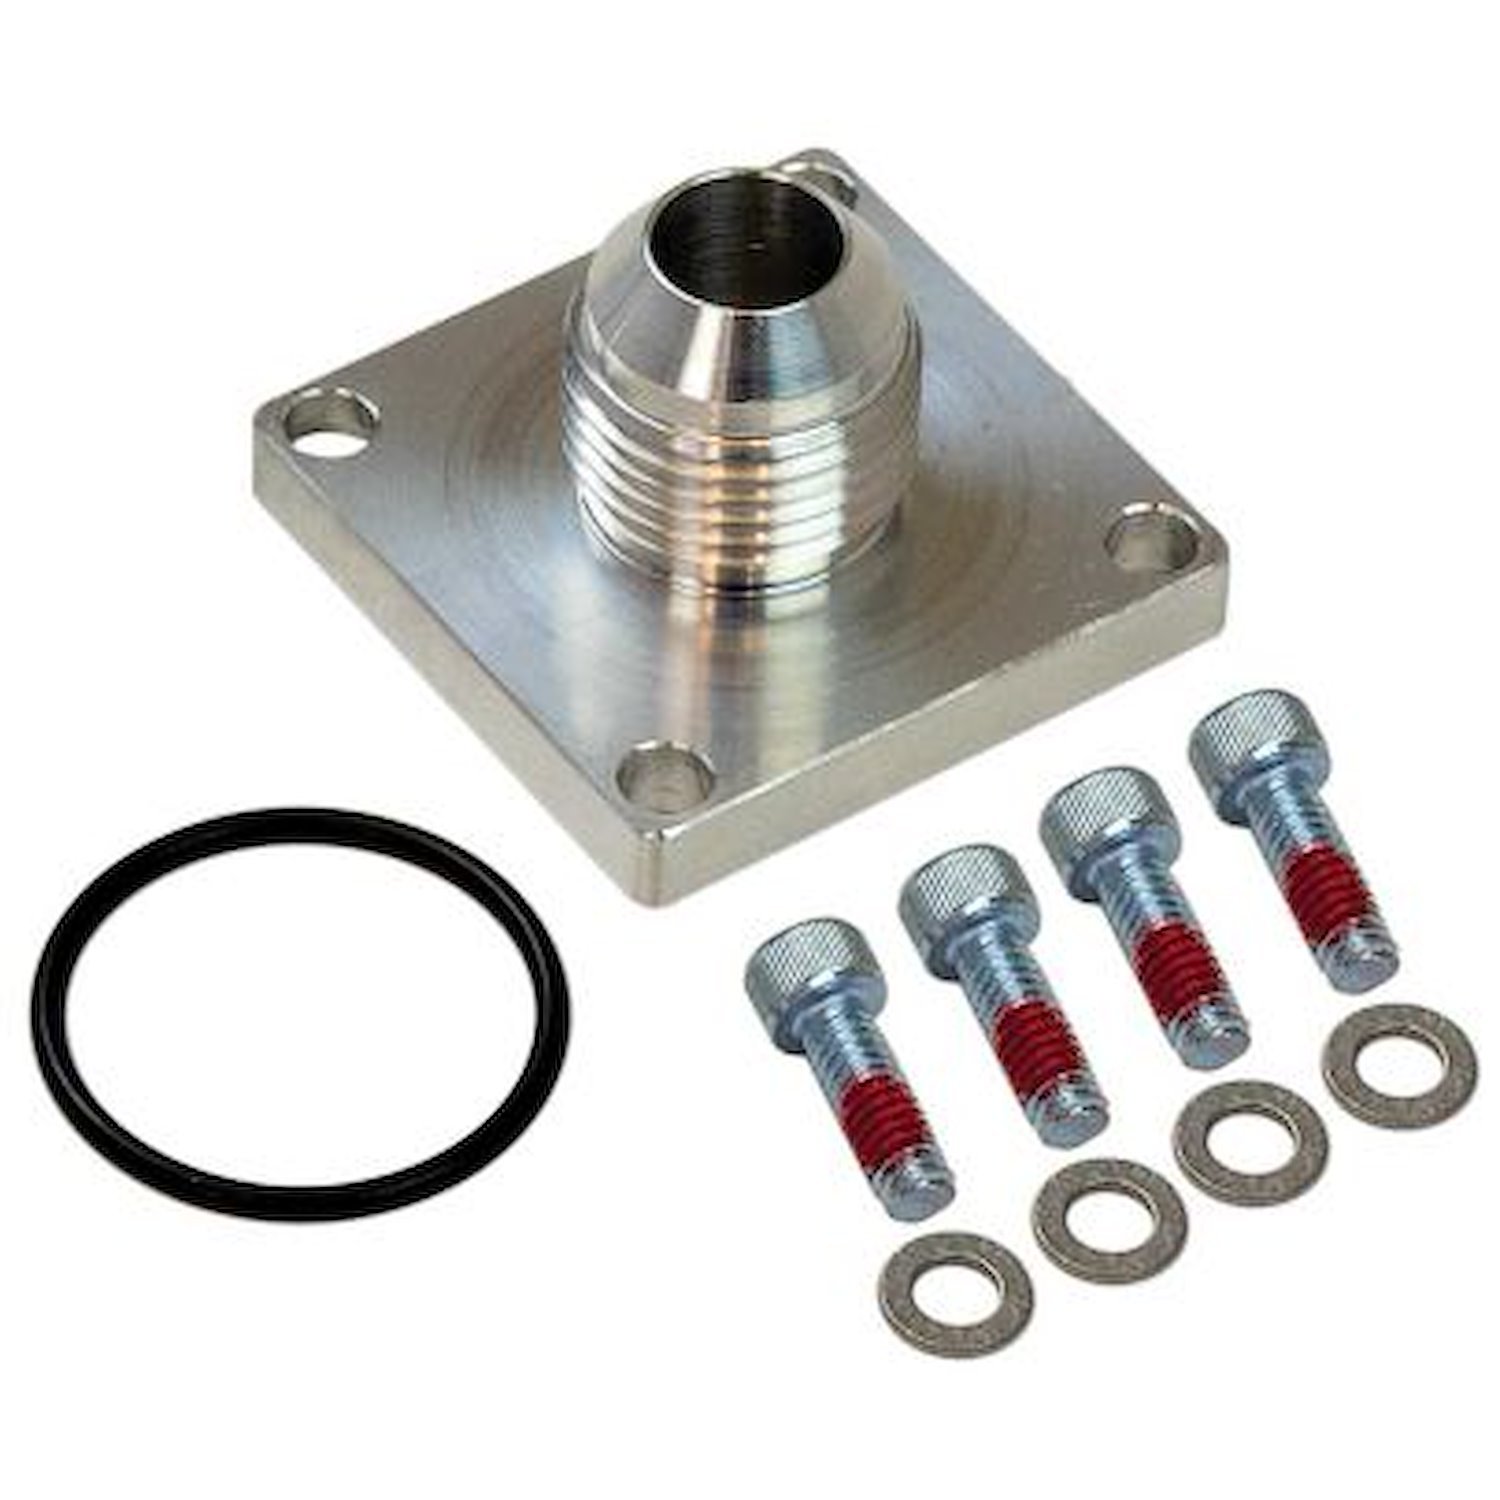 -8AN Male Scavenger Fitting for Dry Sump 4-Bolt Square Base Flange